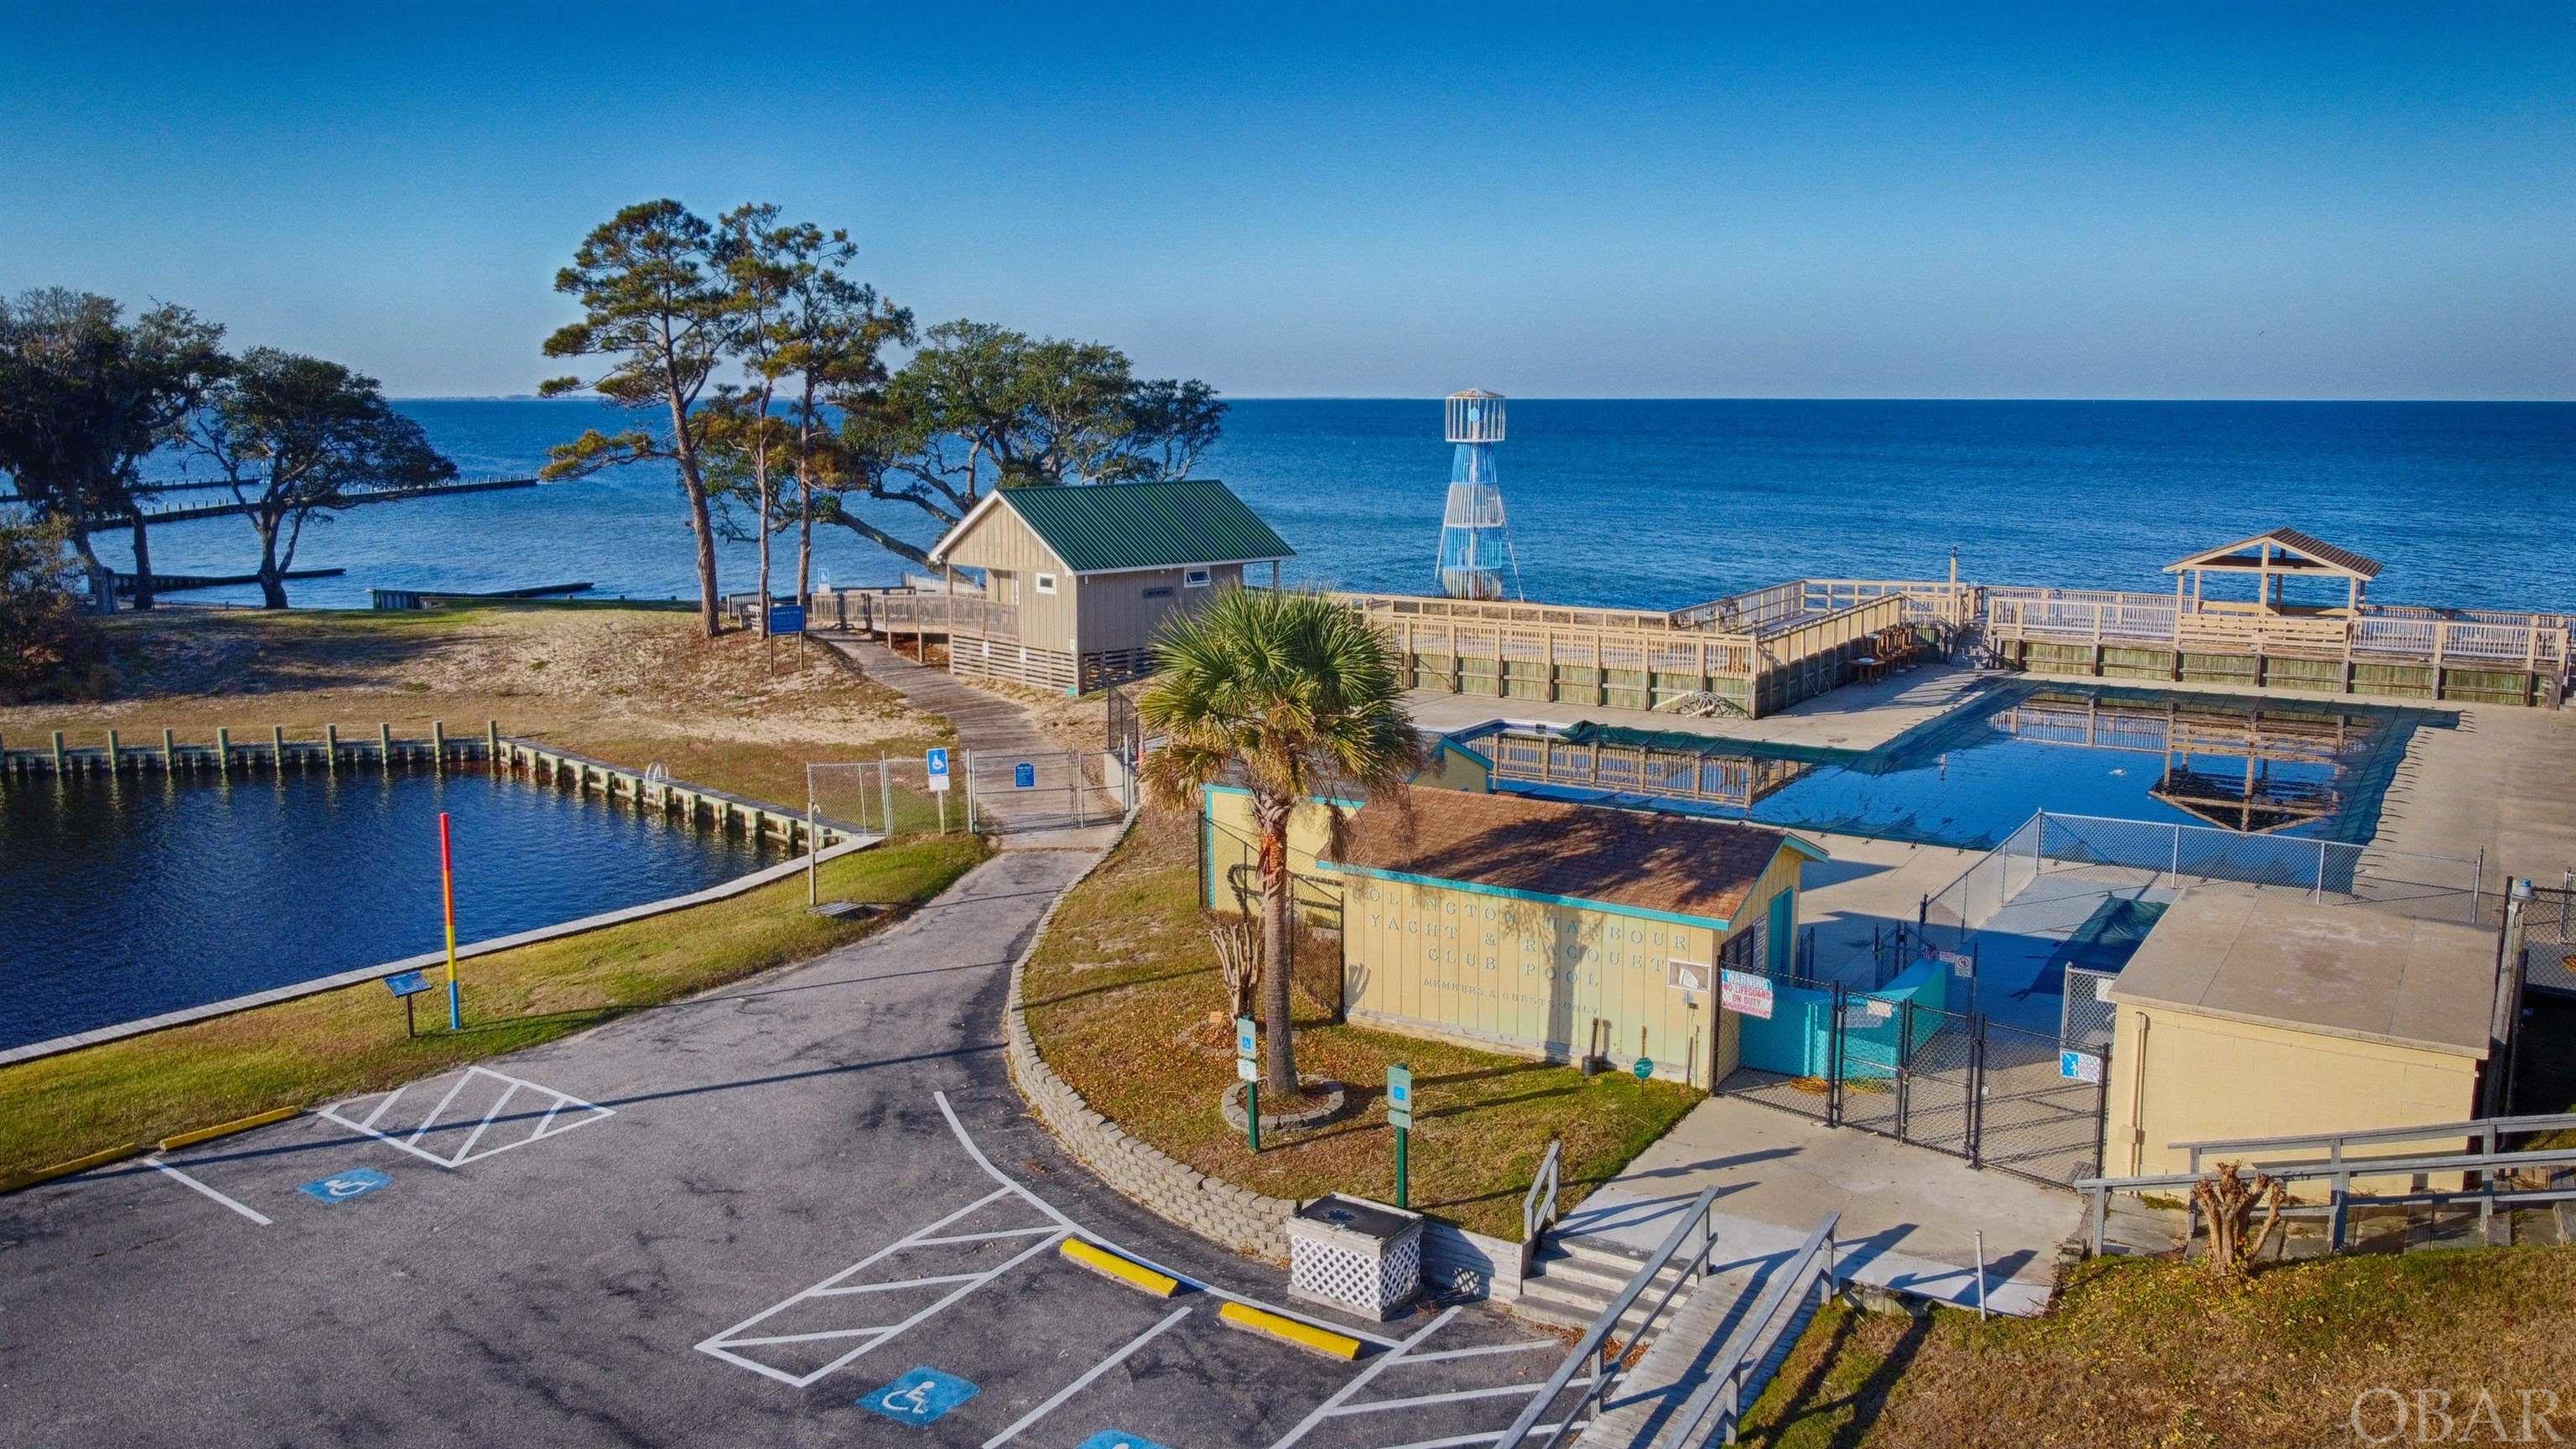 Large community pool with soundfront beach and bathhouse.